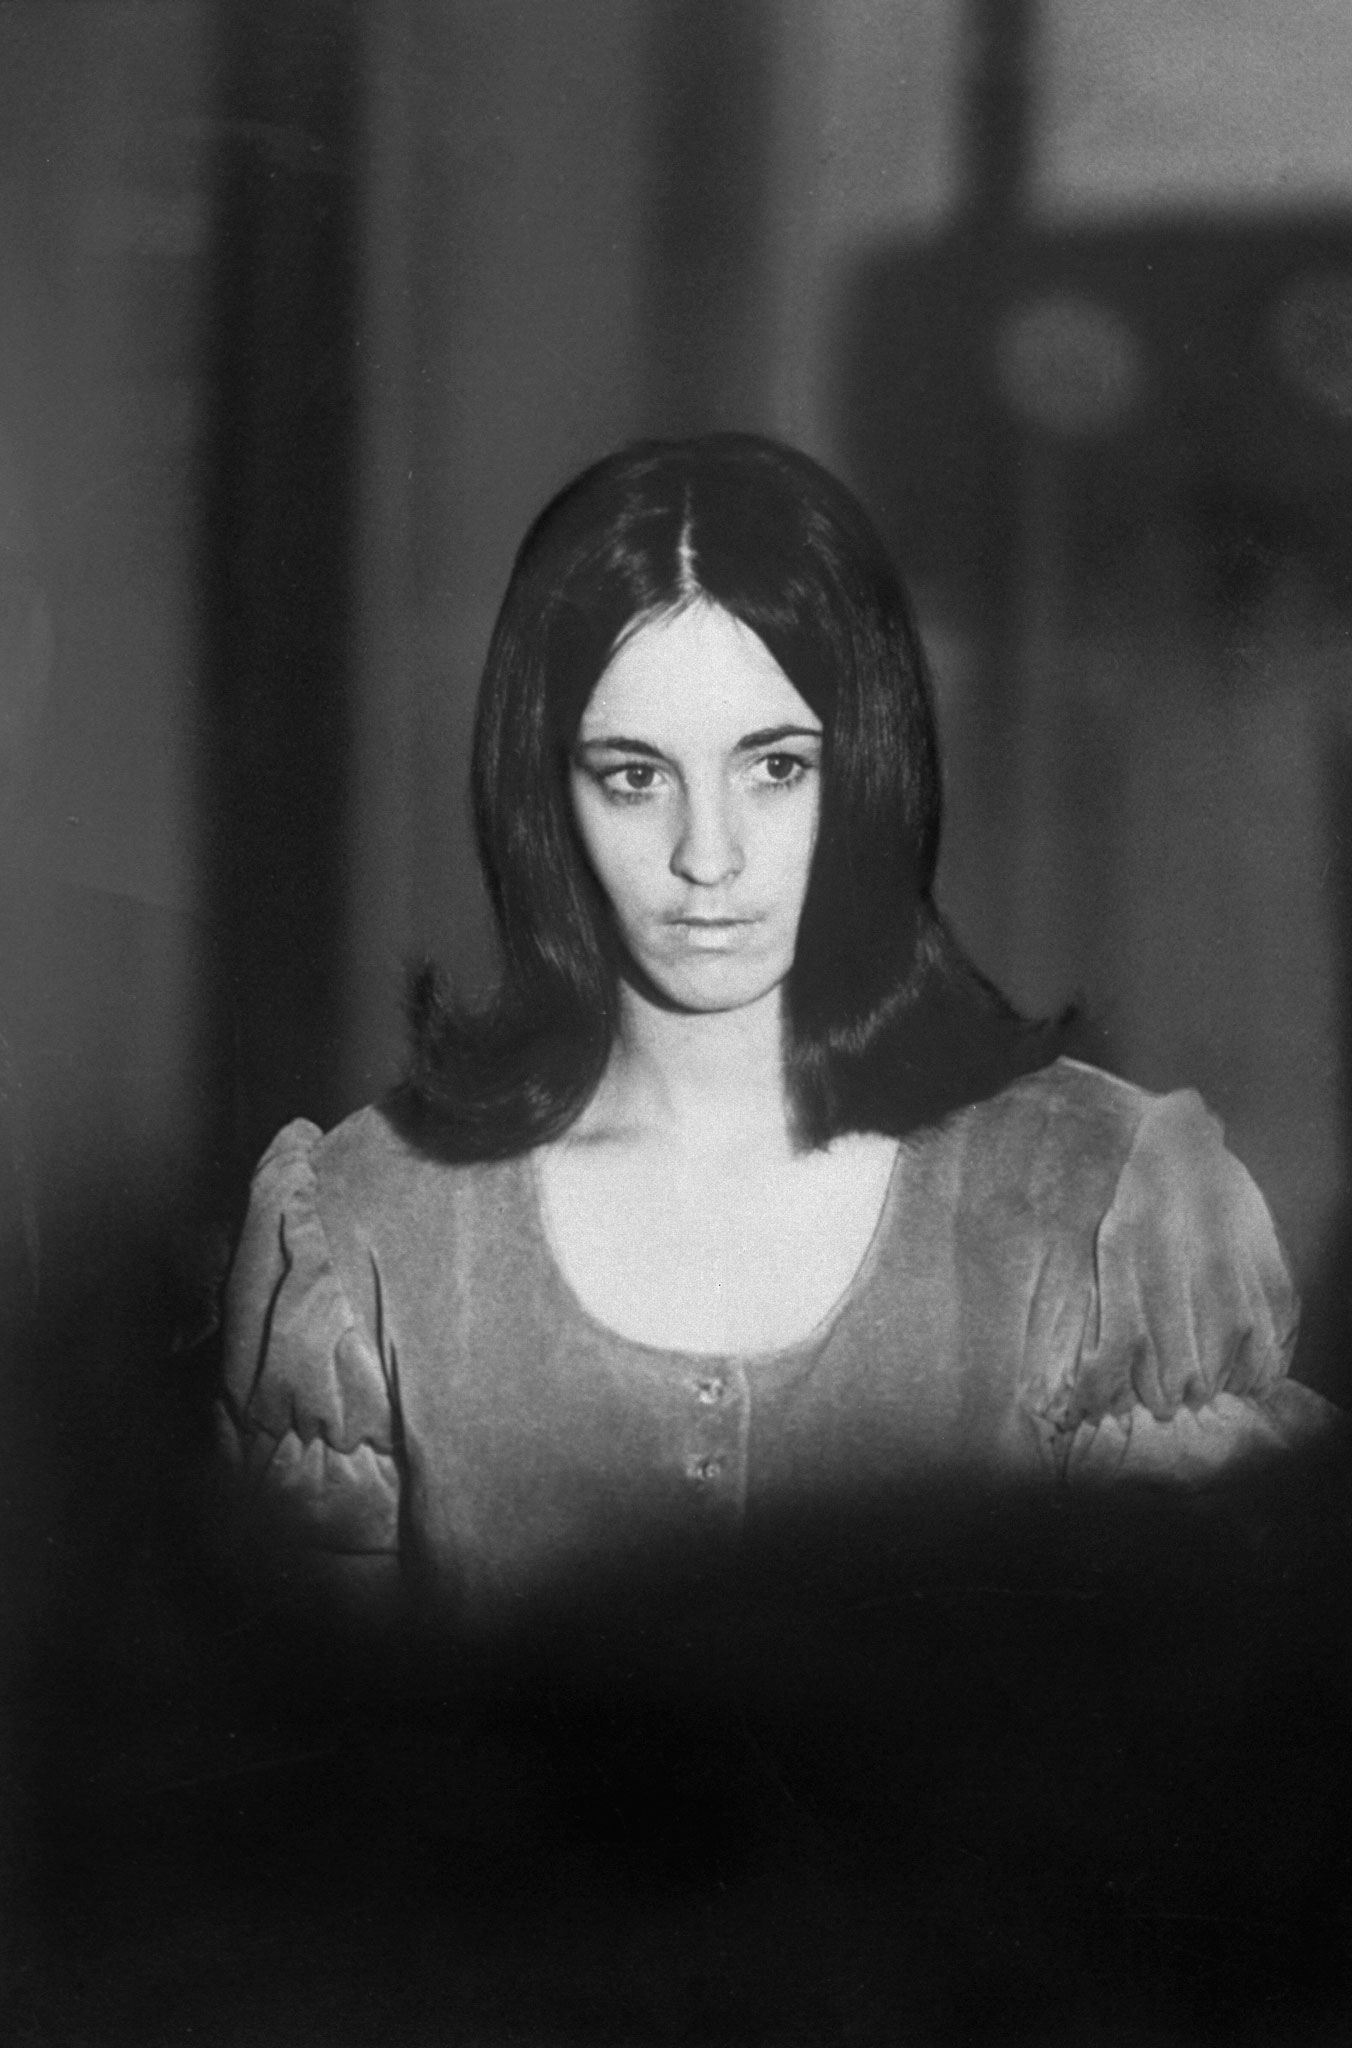 Manson Family member Susan Atkins, 21, emerges from a Los Angeles courtroom after grand jury testimony, December 1969.